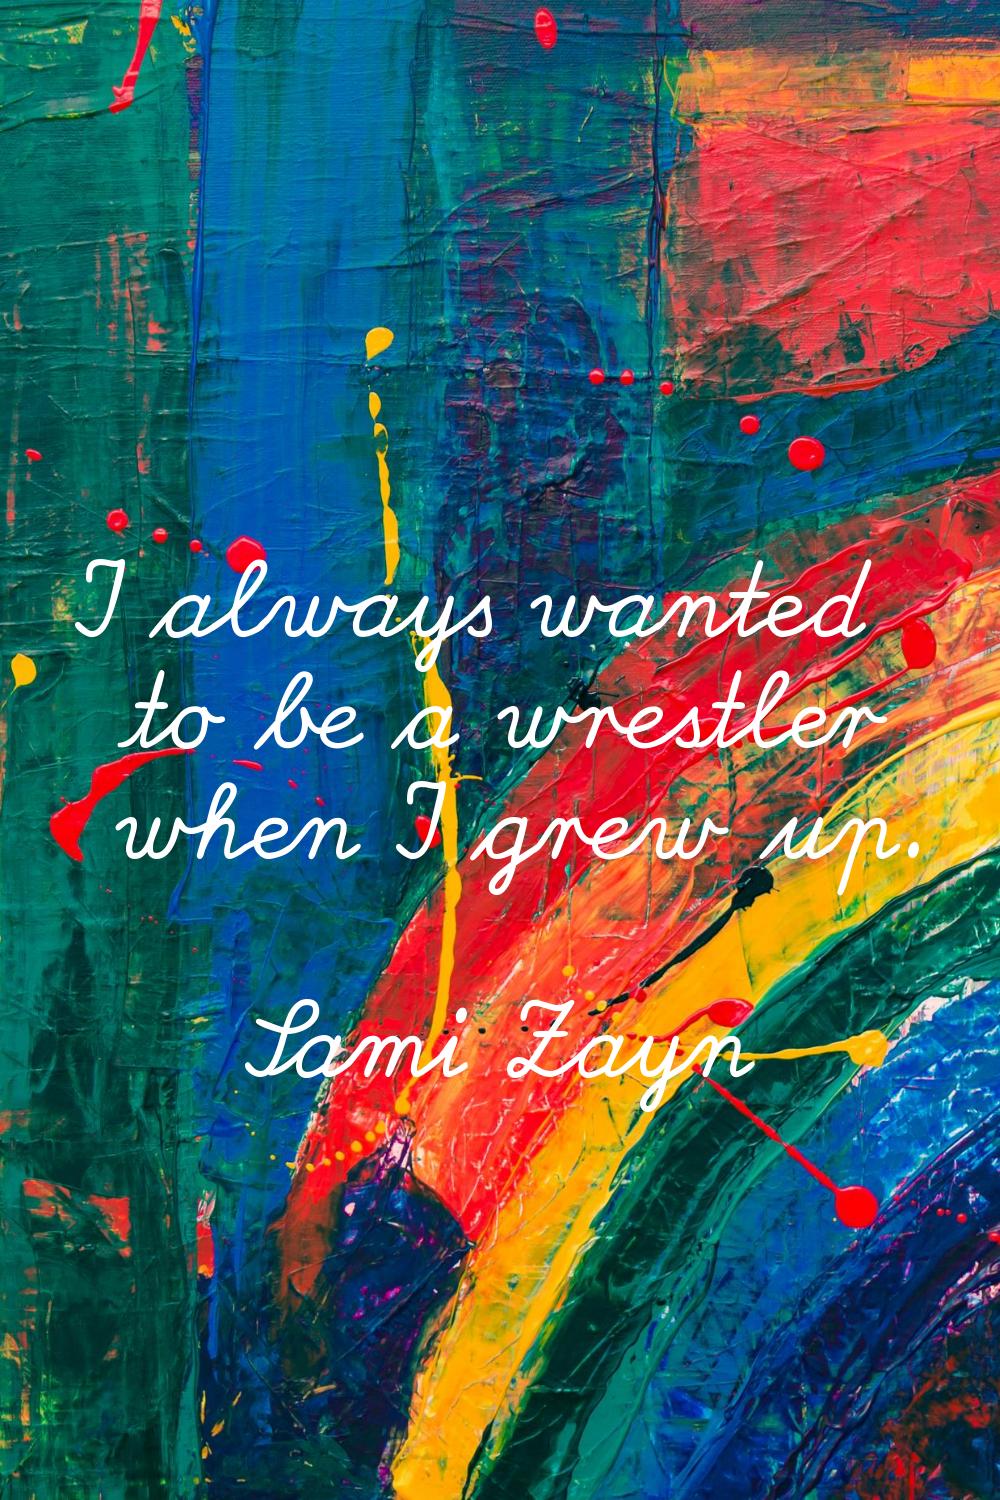 I always wanted to be a wrestler when I grew up.